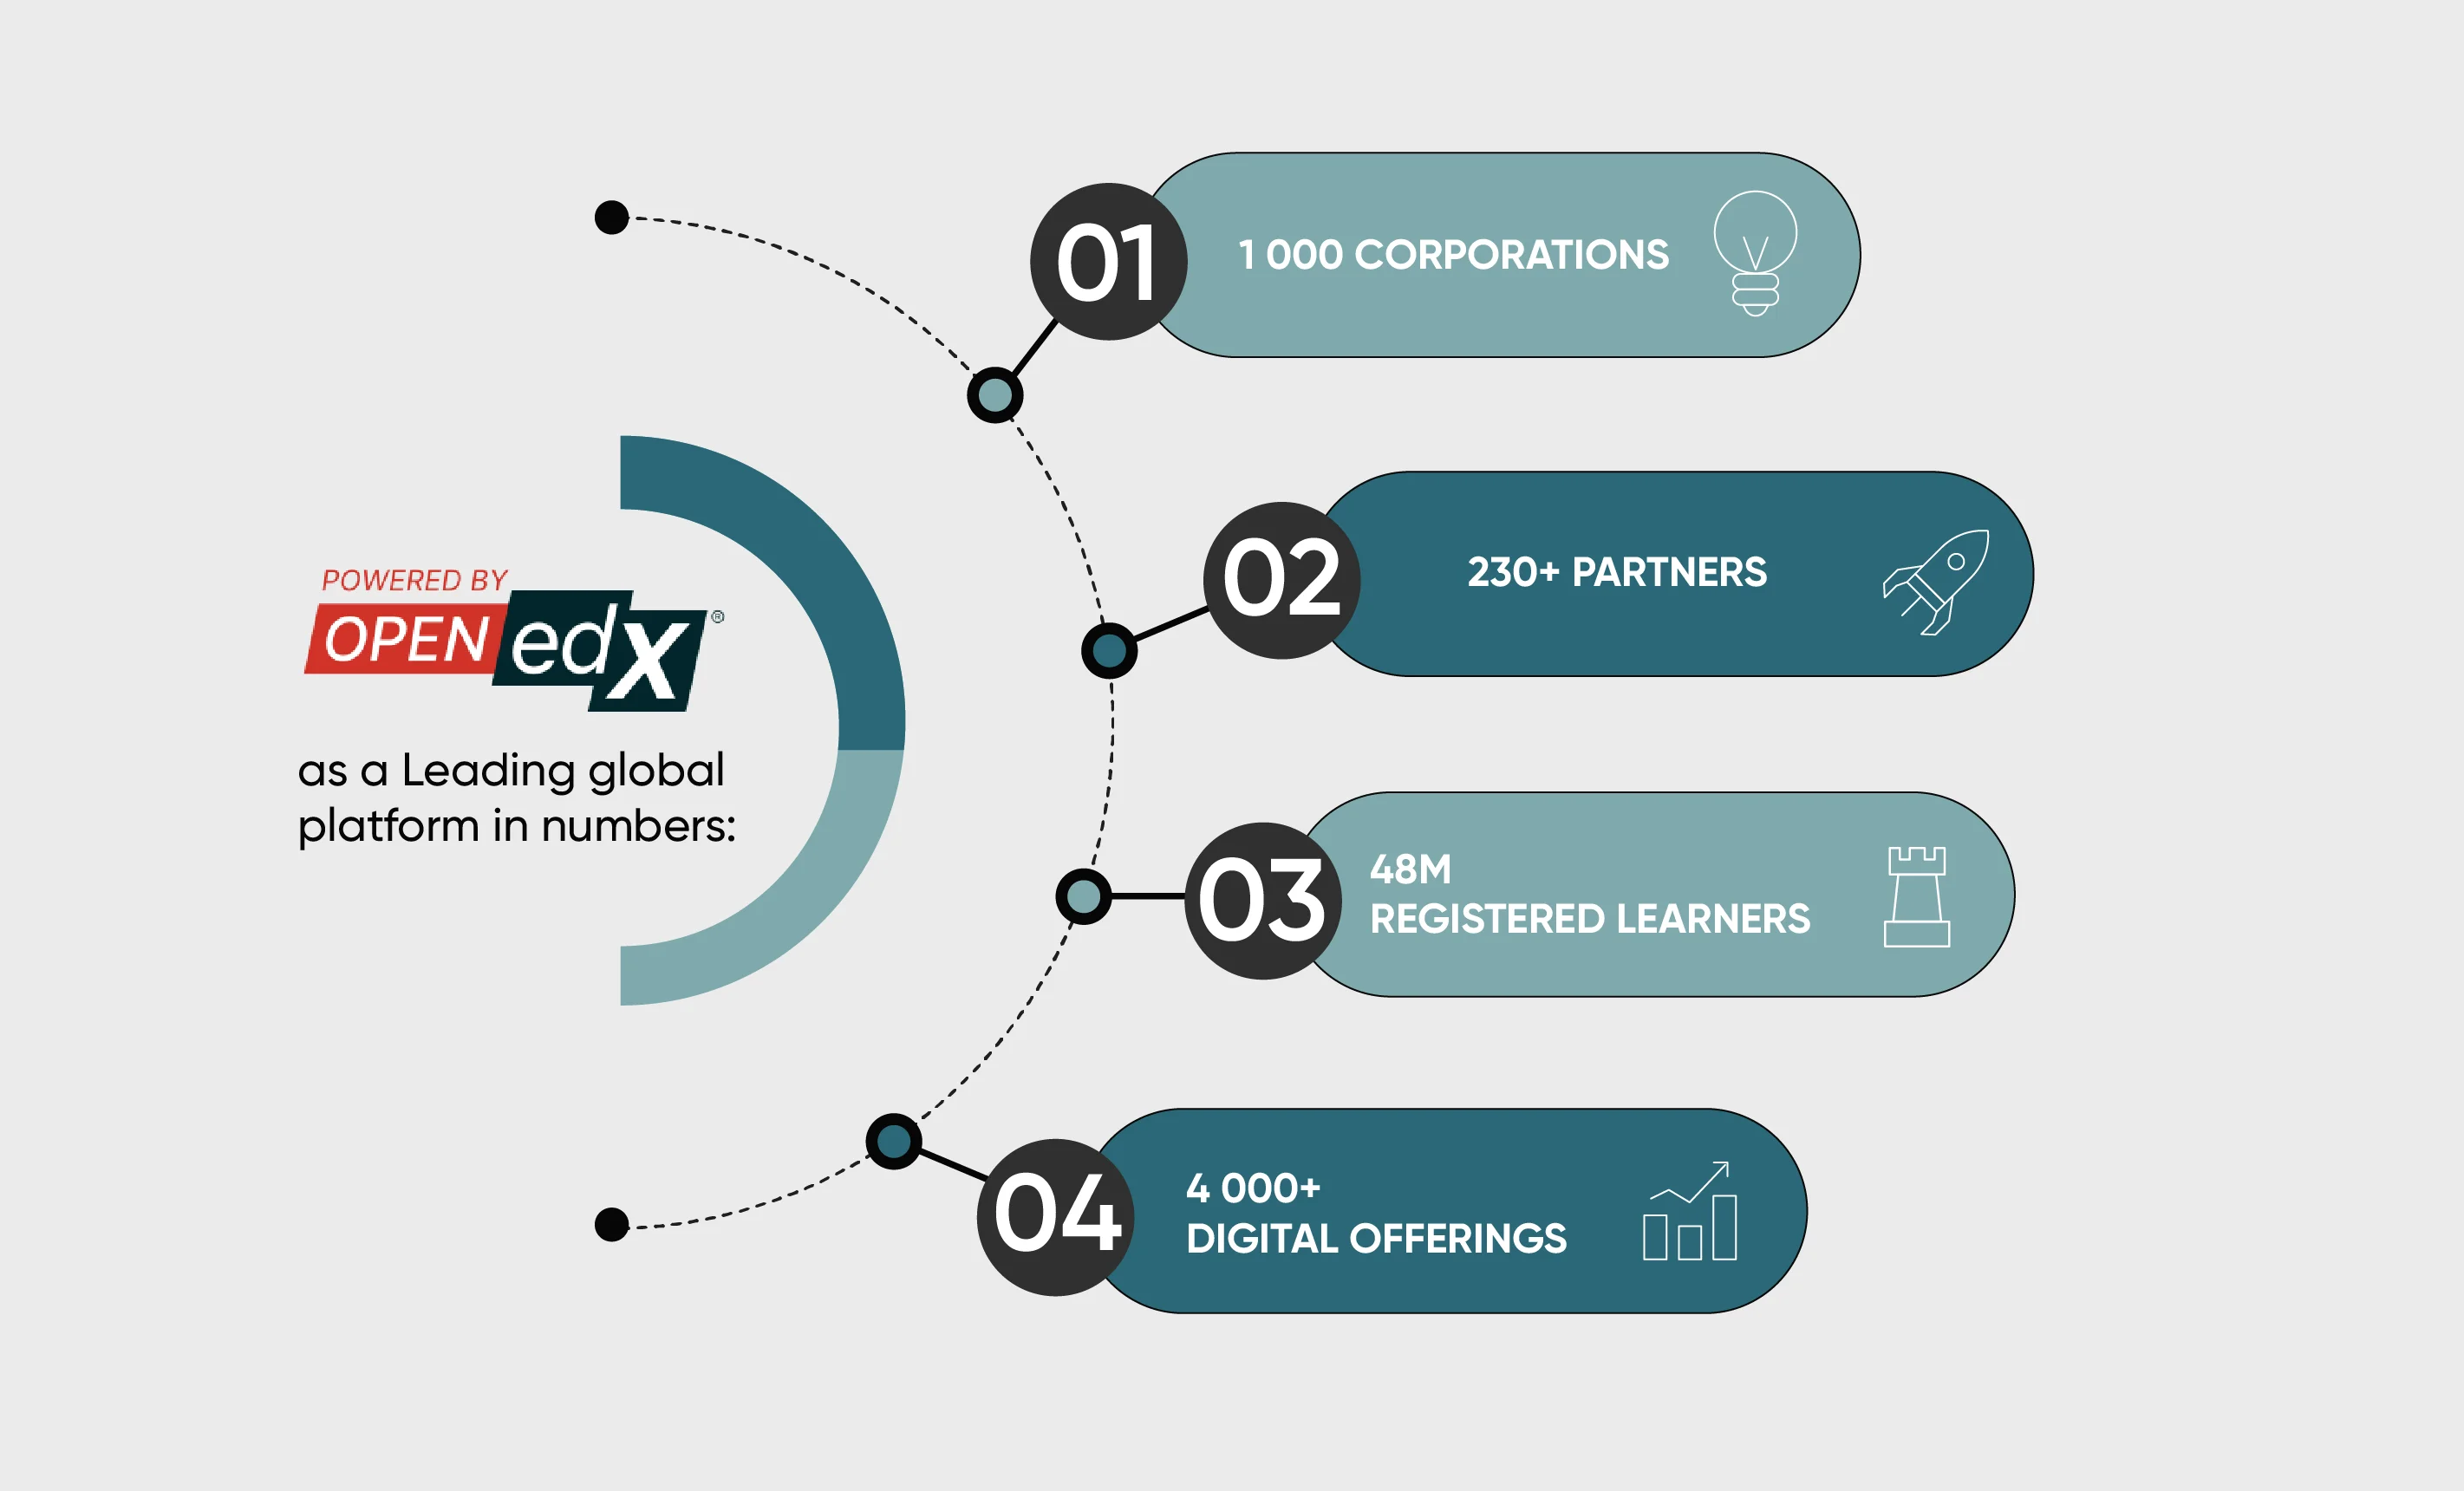 Open edX as a Leading global platform in numbers